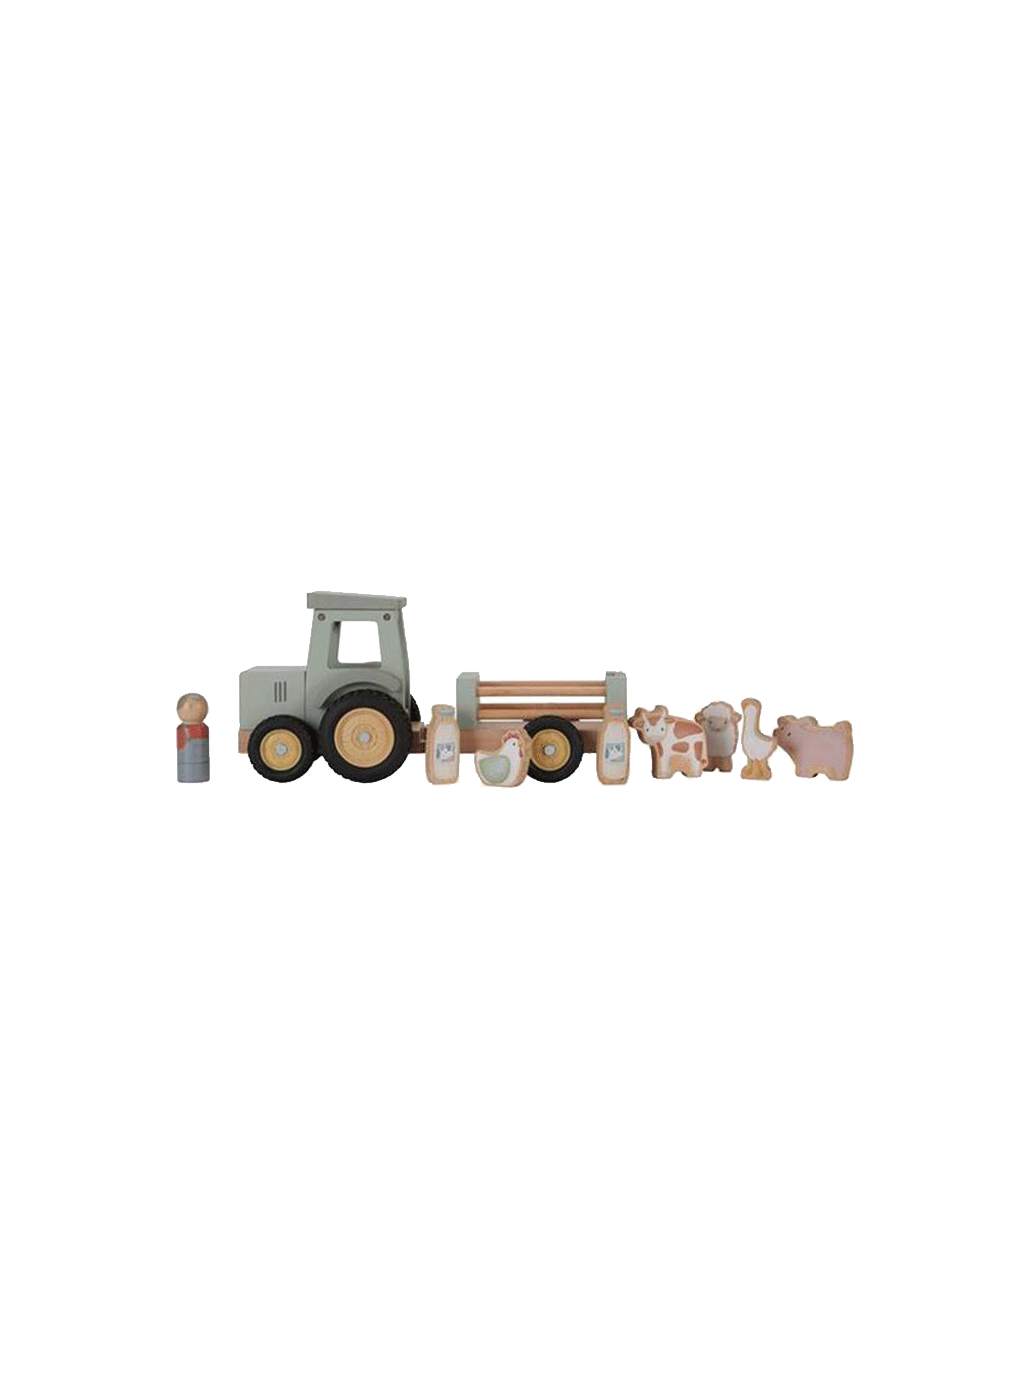 Wooden tractor with trailer